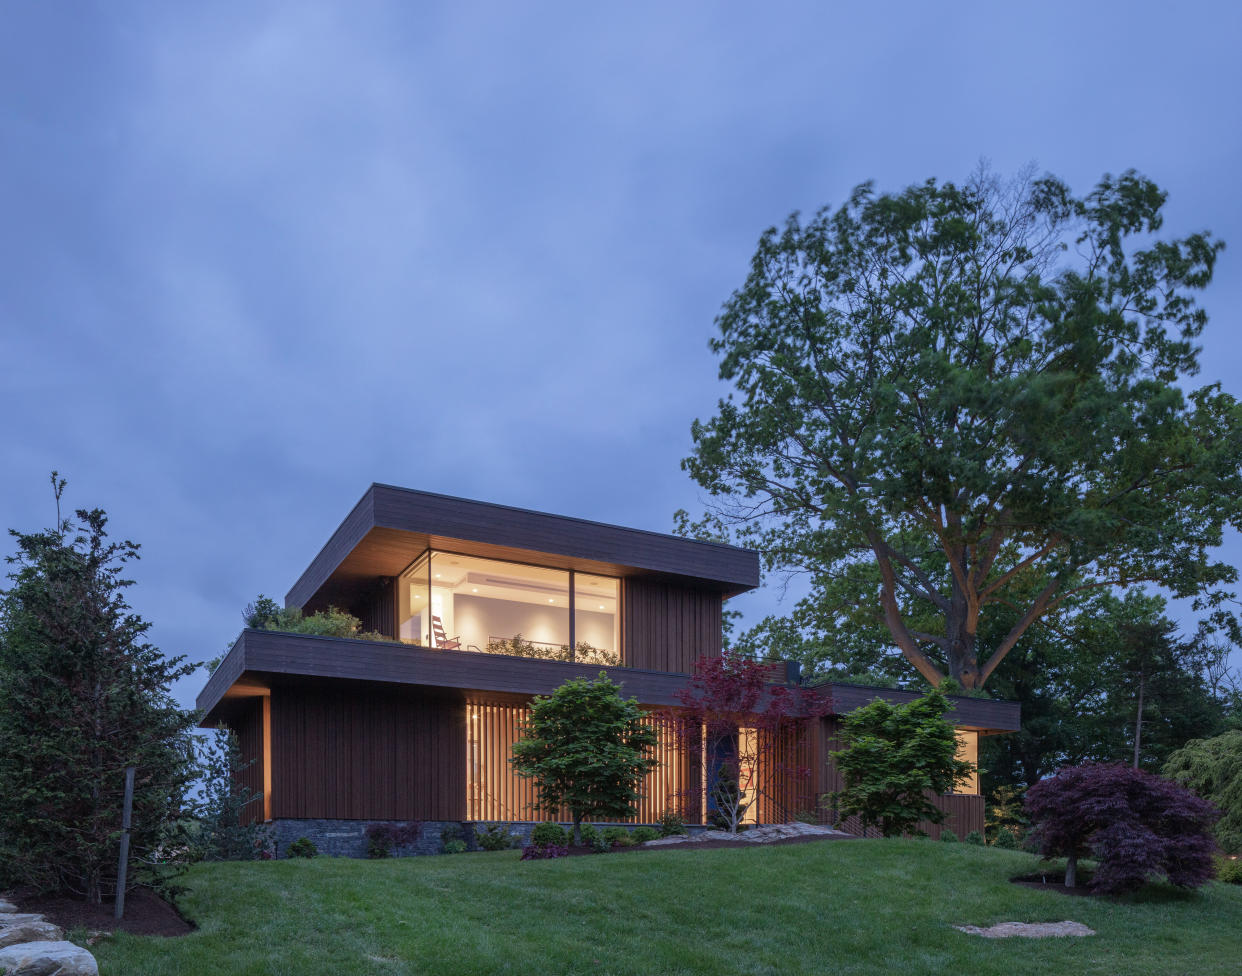  Exterior shot of a modern home with large windows at dusk 